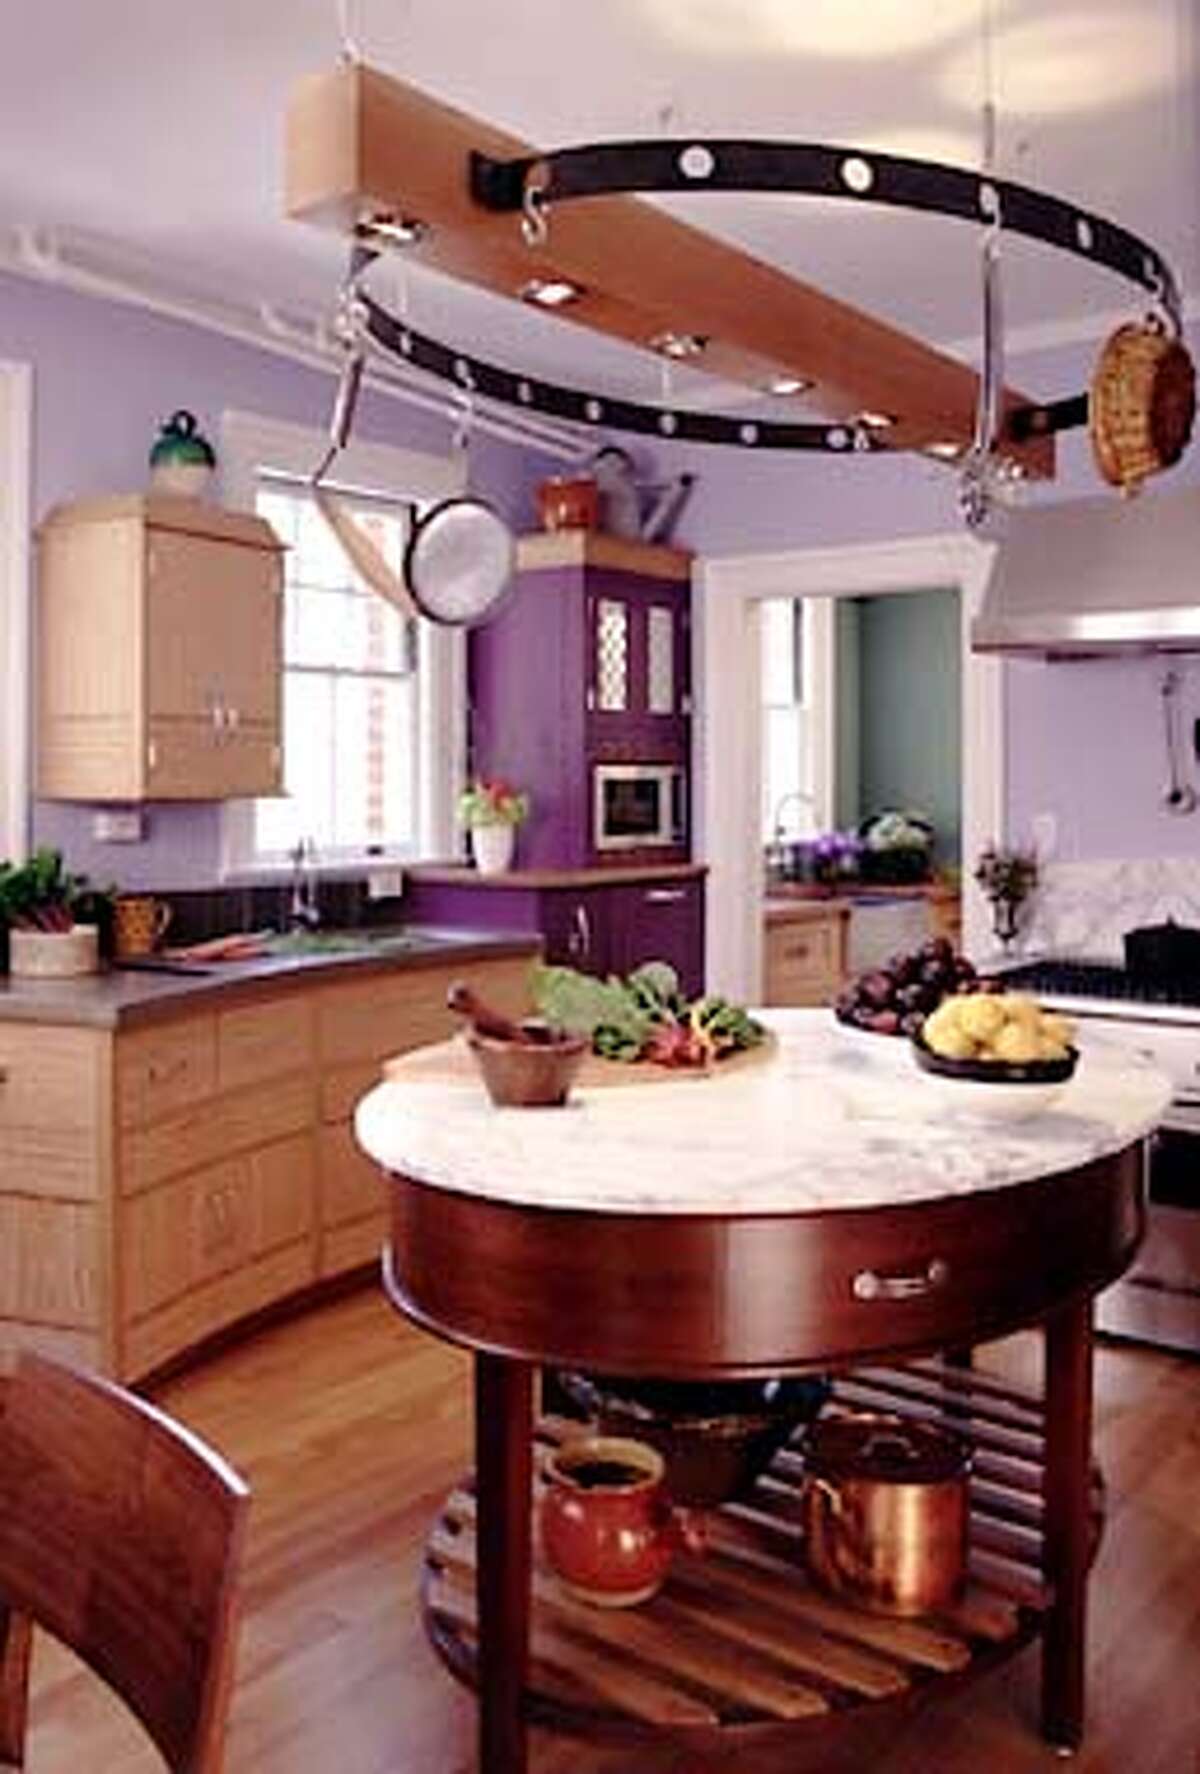 Showcase chic / From elegant kitchen colors to beaded shades and